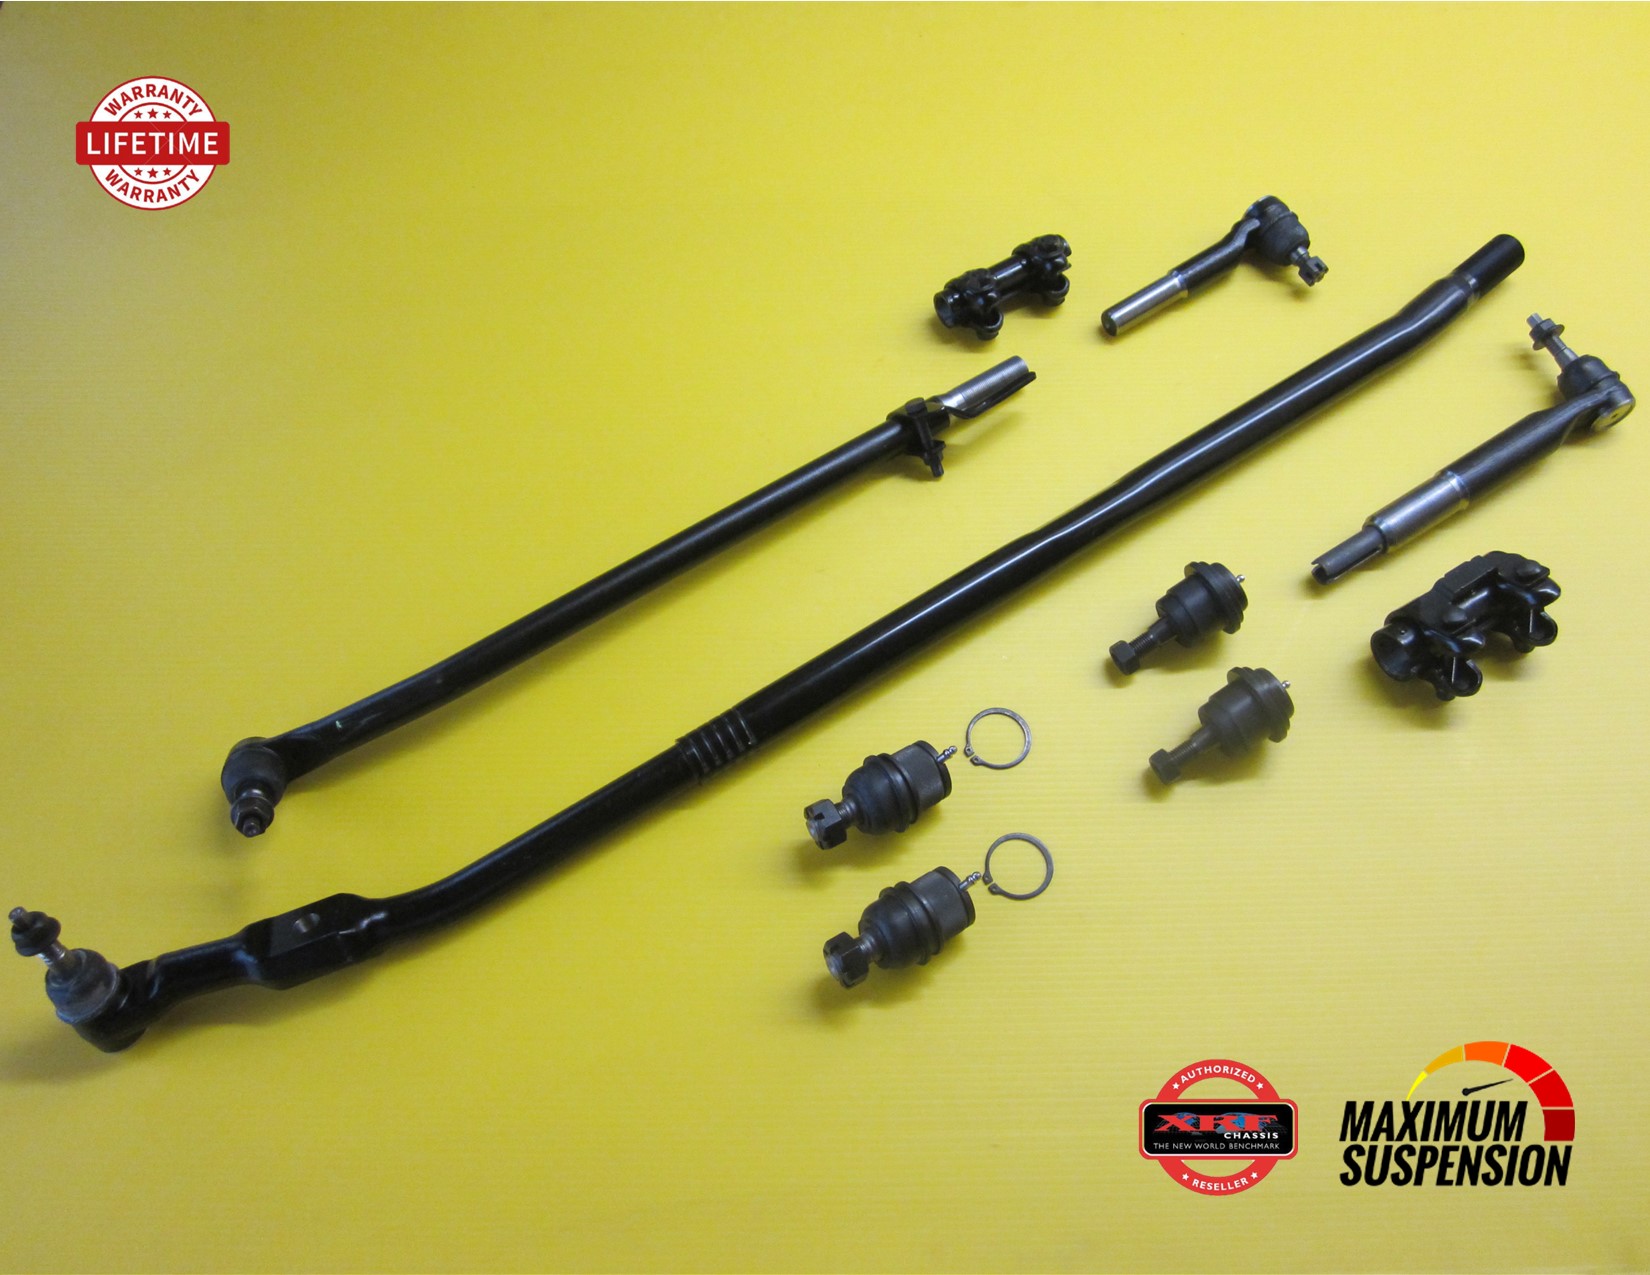 10 Pc Suspension Kit for Dodge Ram 2500 3500 03-10 Tie Rods Sway Bar Ball Joints